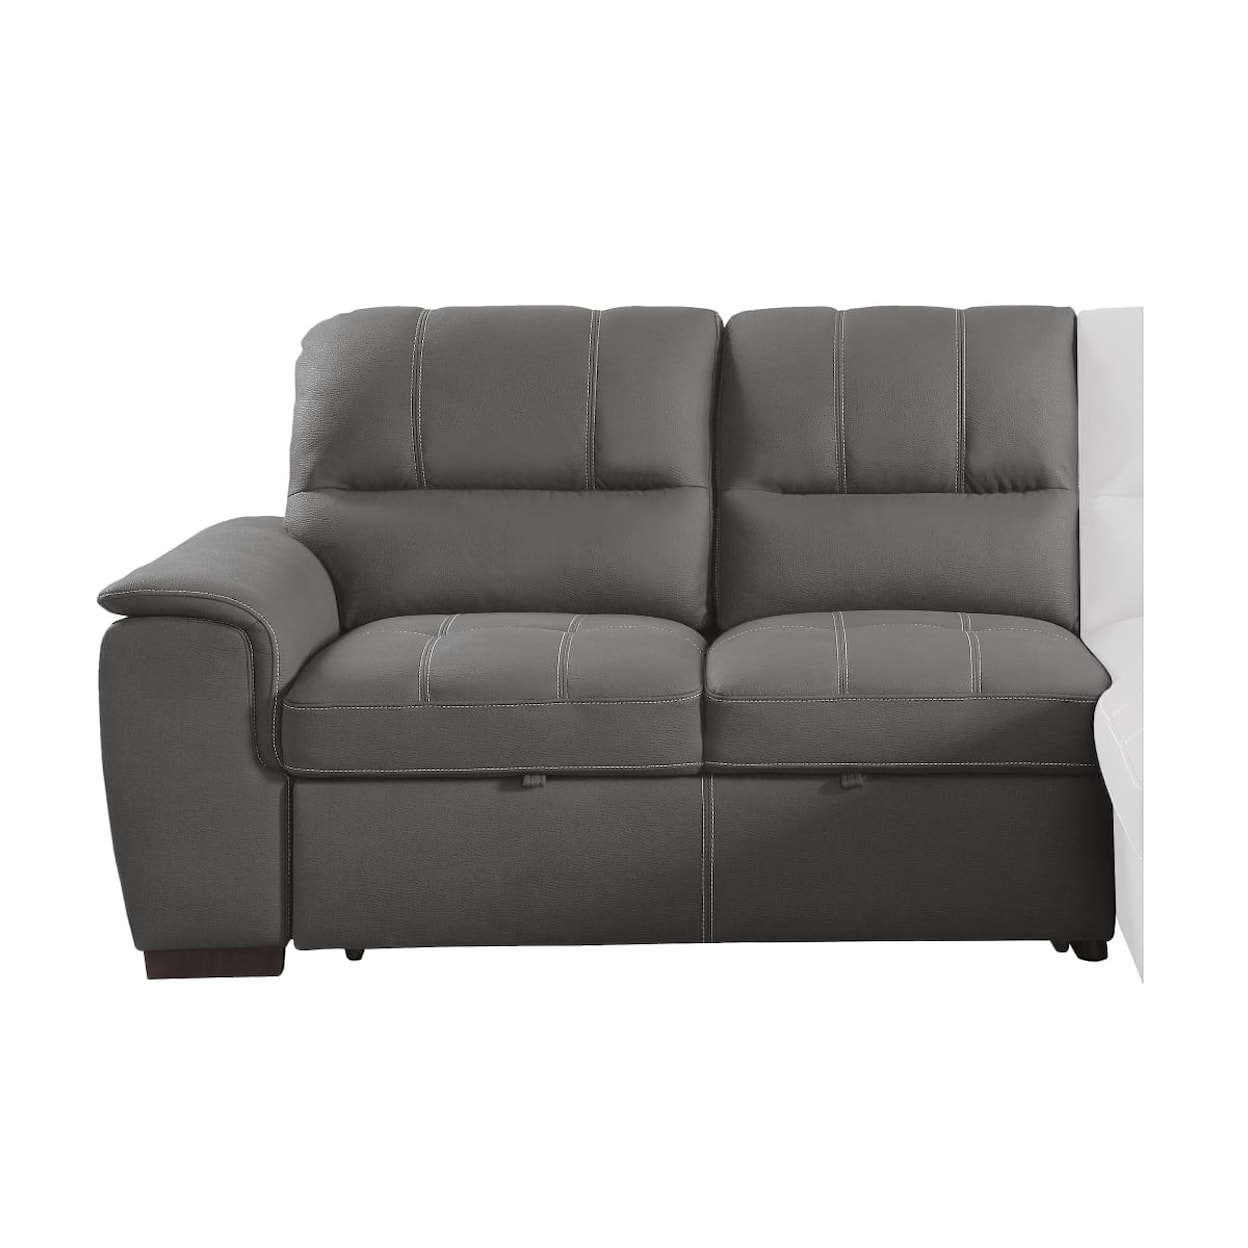 Homelegance Andes 2-Piece Sectional Sofa